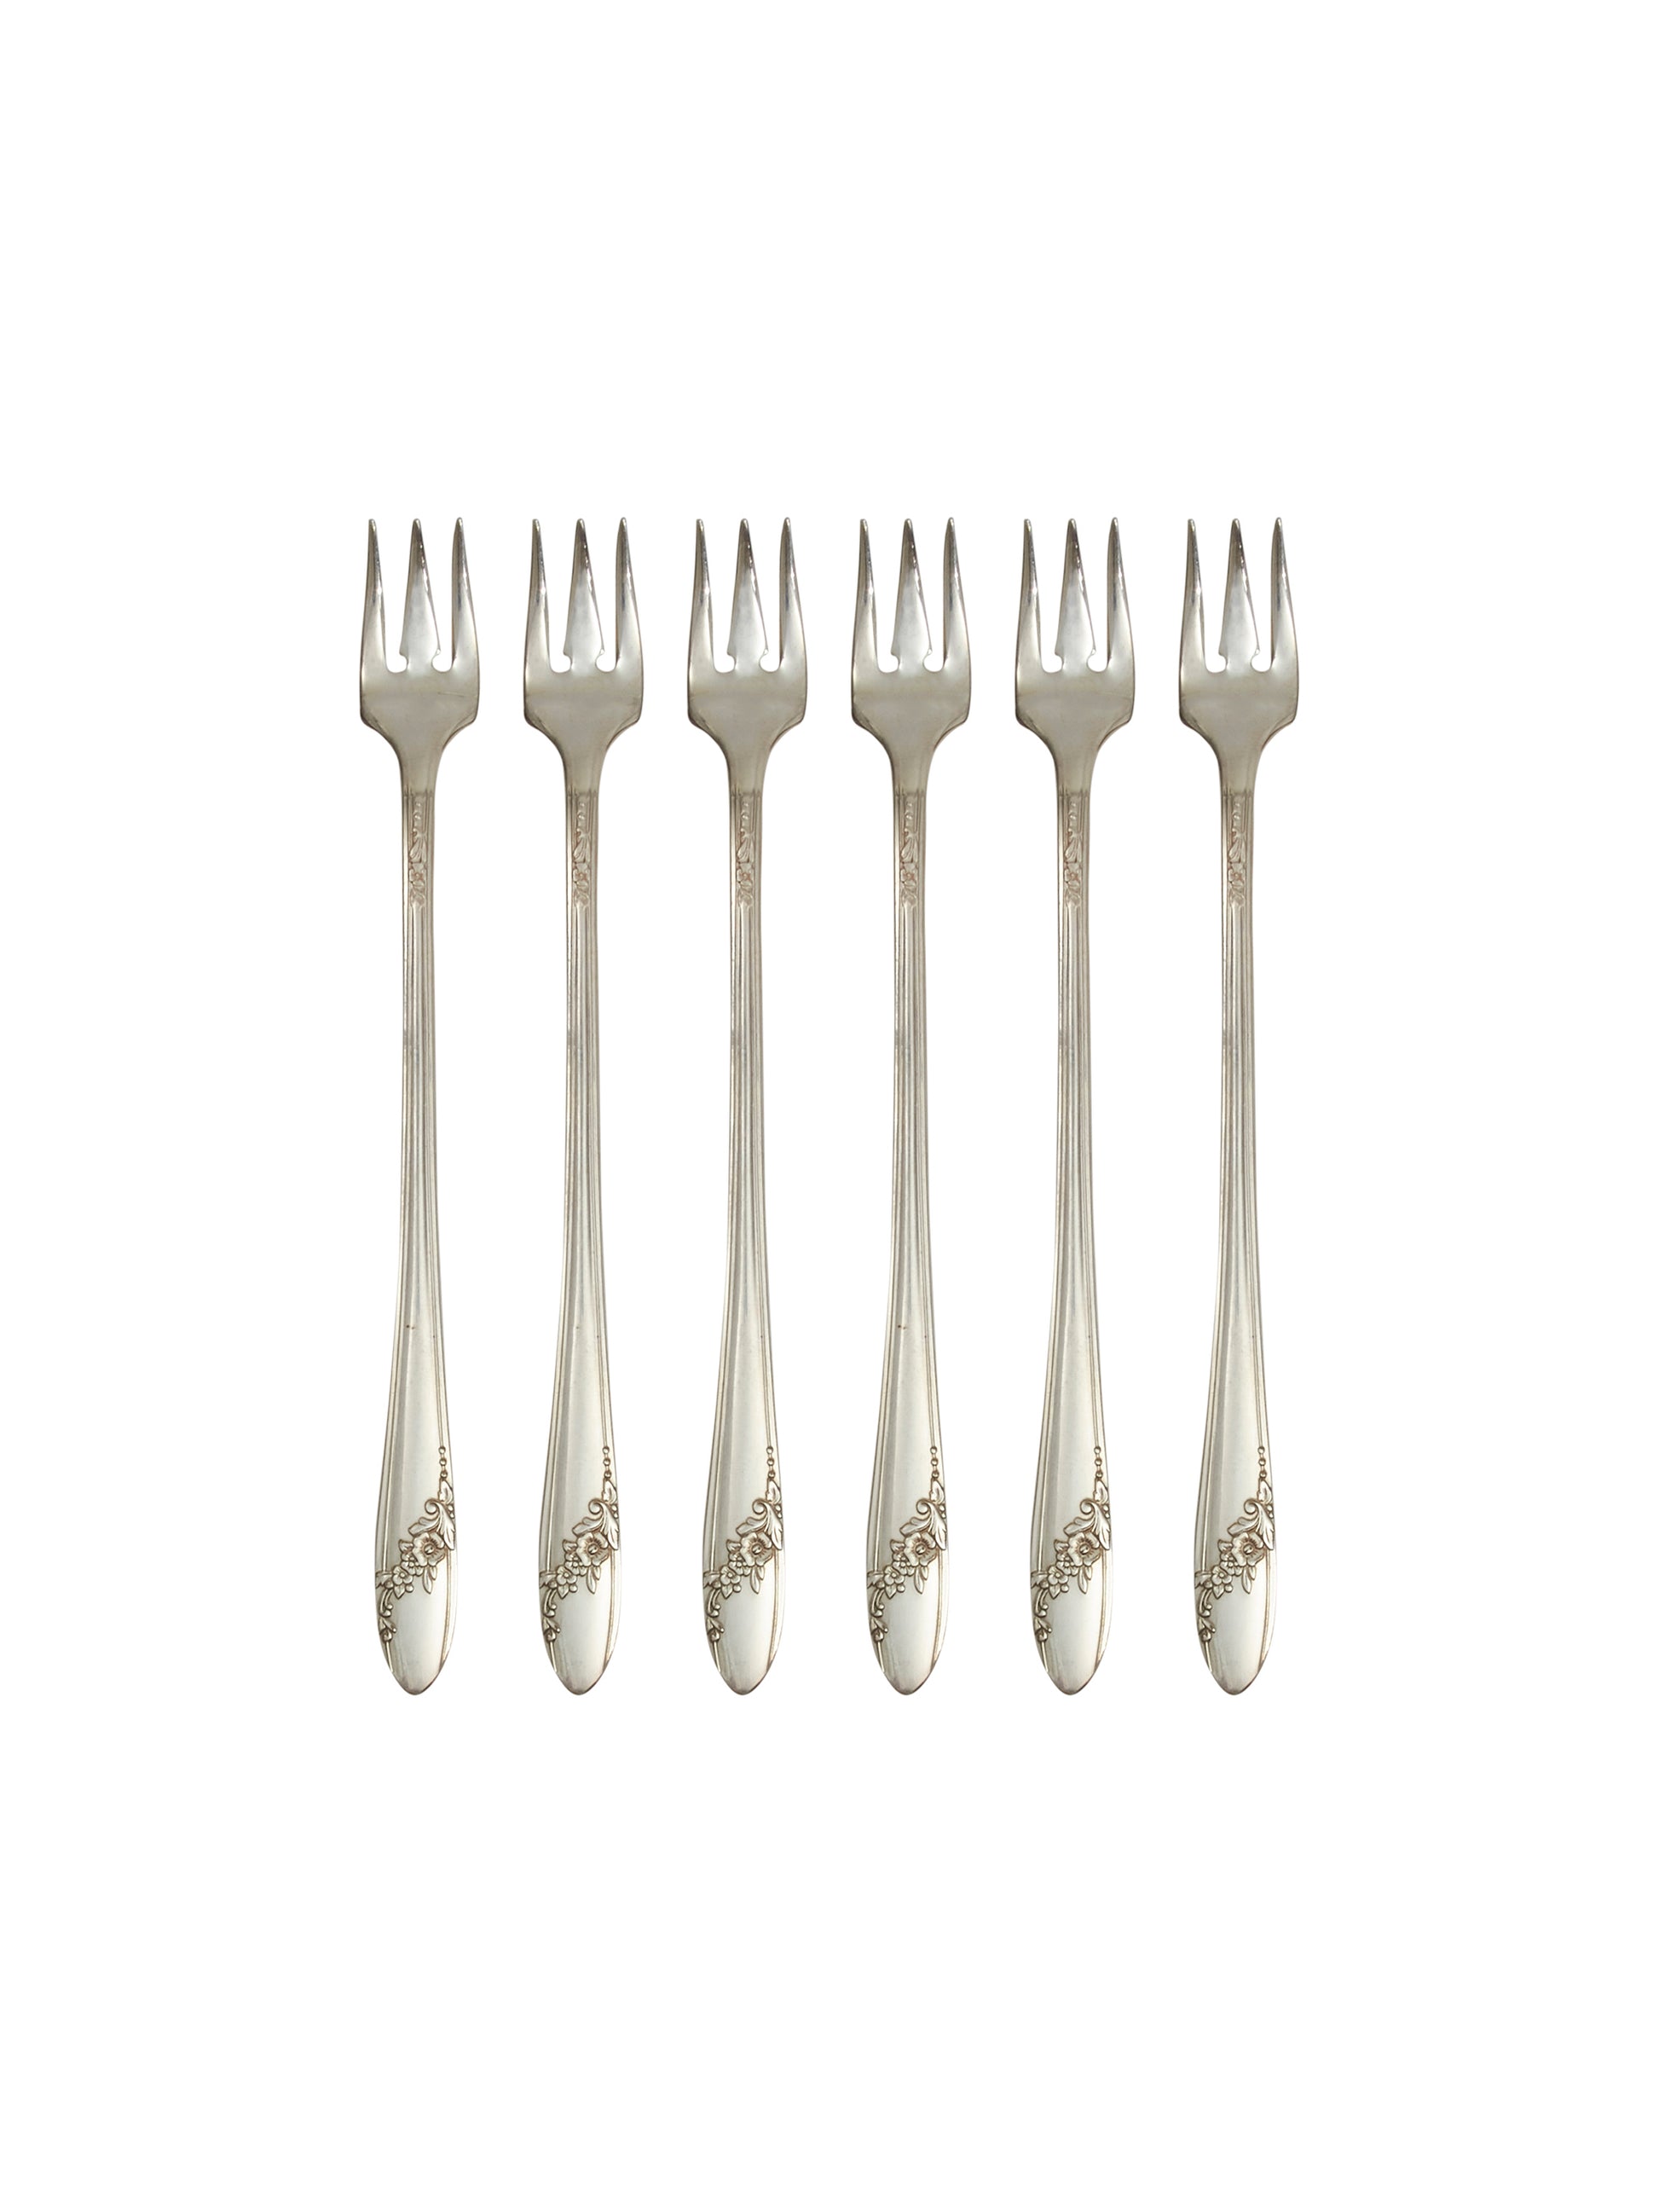 Vintage 1940s Tudor Silver Plate Oyster Forks Set of Six Weston Table